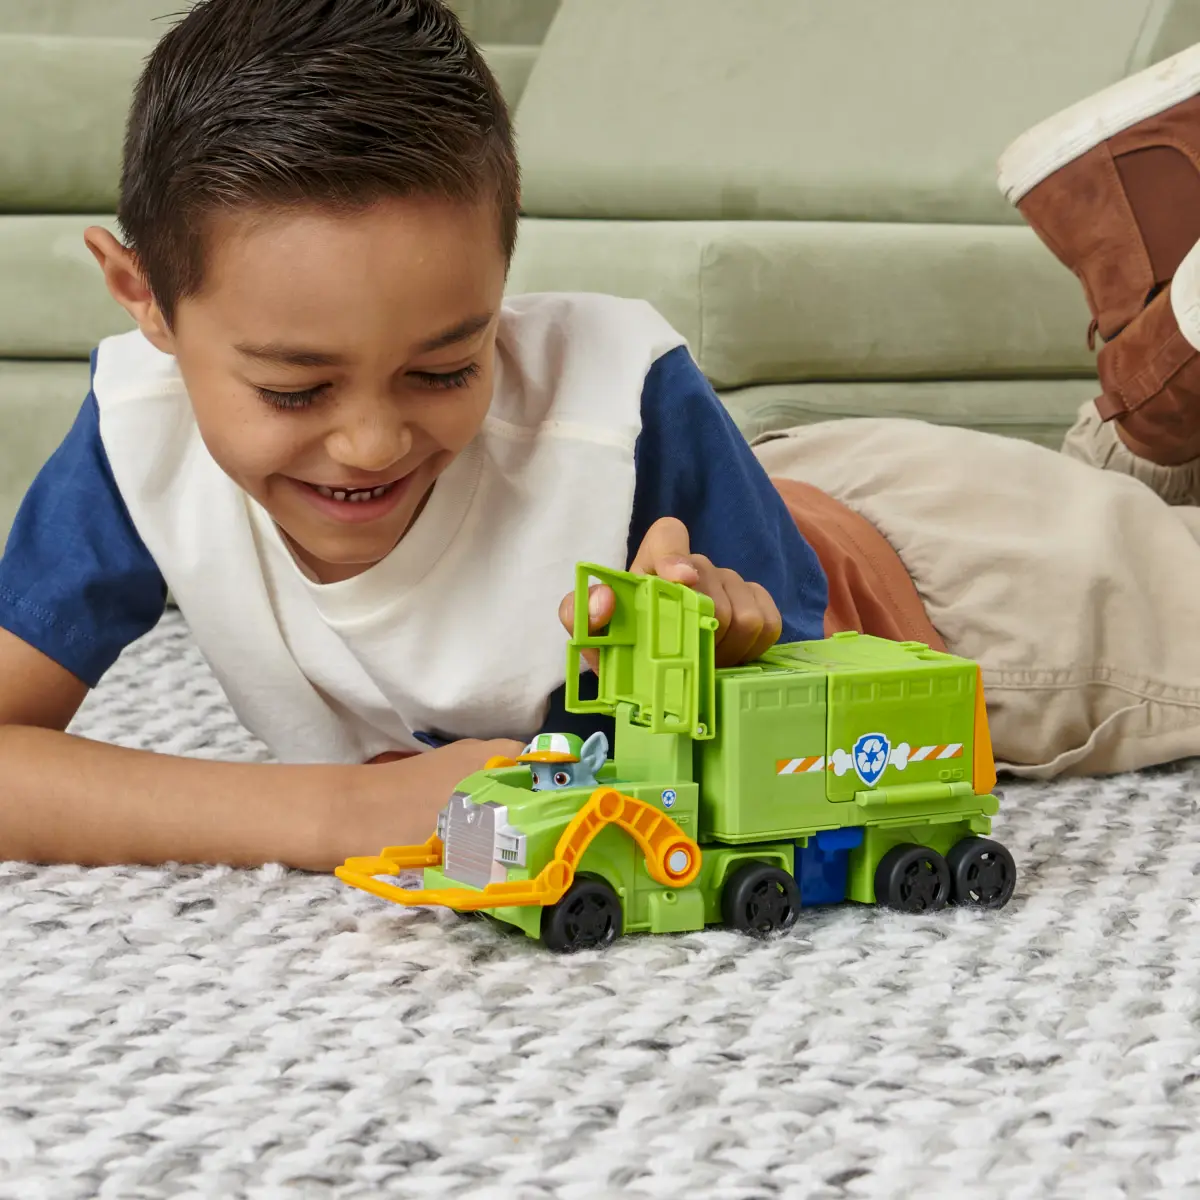 Paw Patrol, Big Truck Pup’S Rocky Transforming Toy Trucks With Collectible Action Figure, Kids Toys For Ages 3 And Up